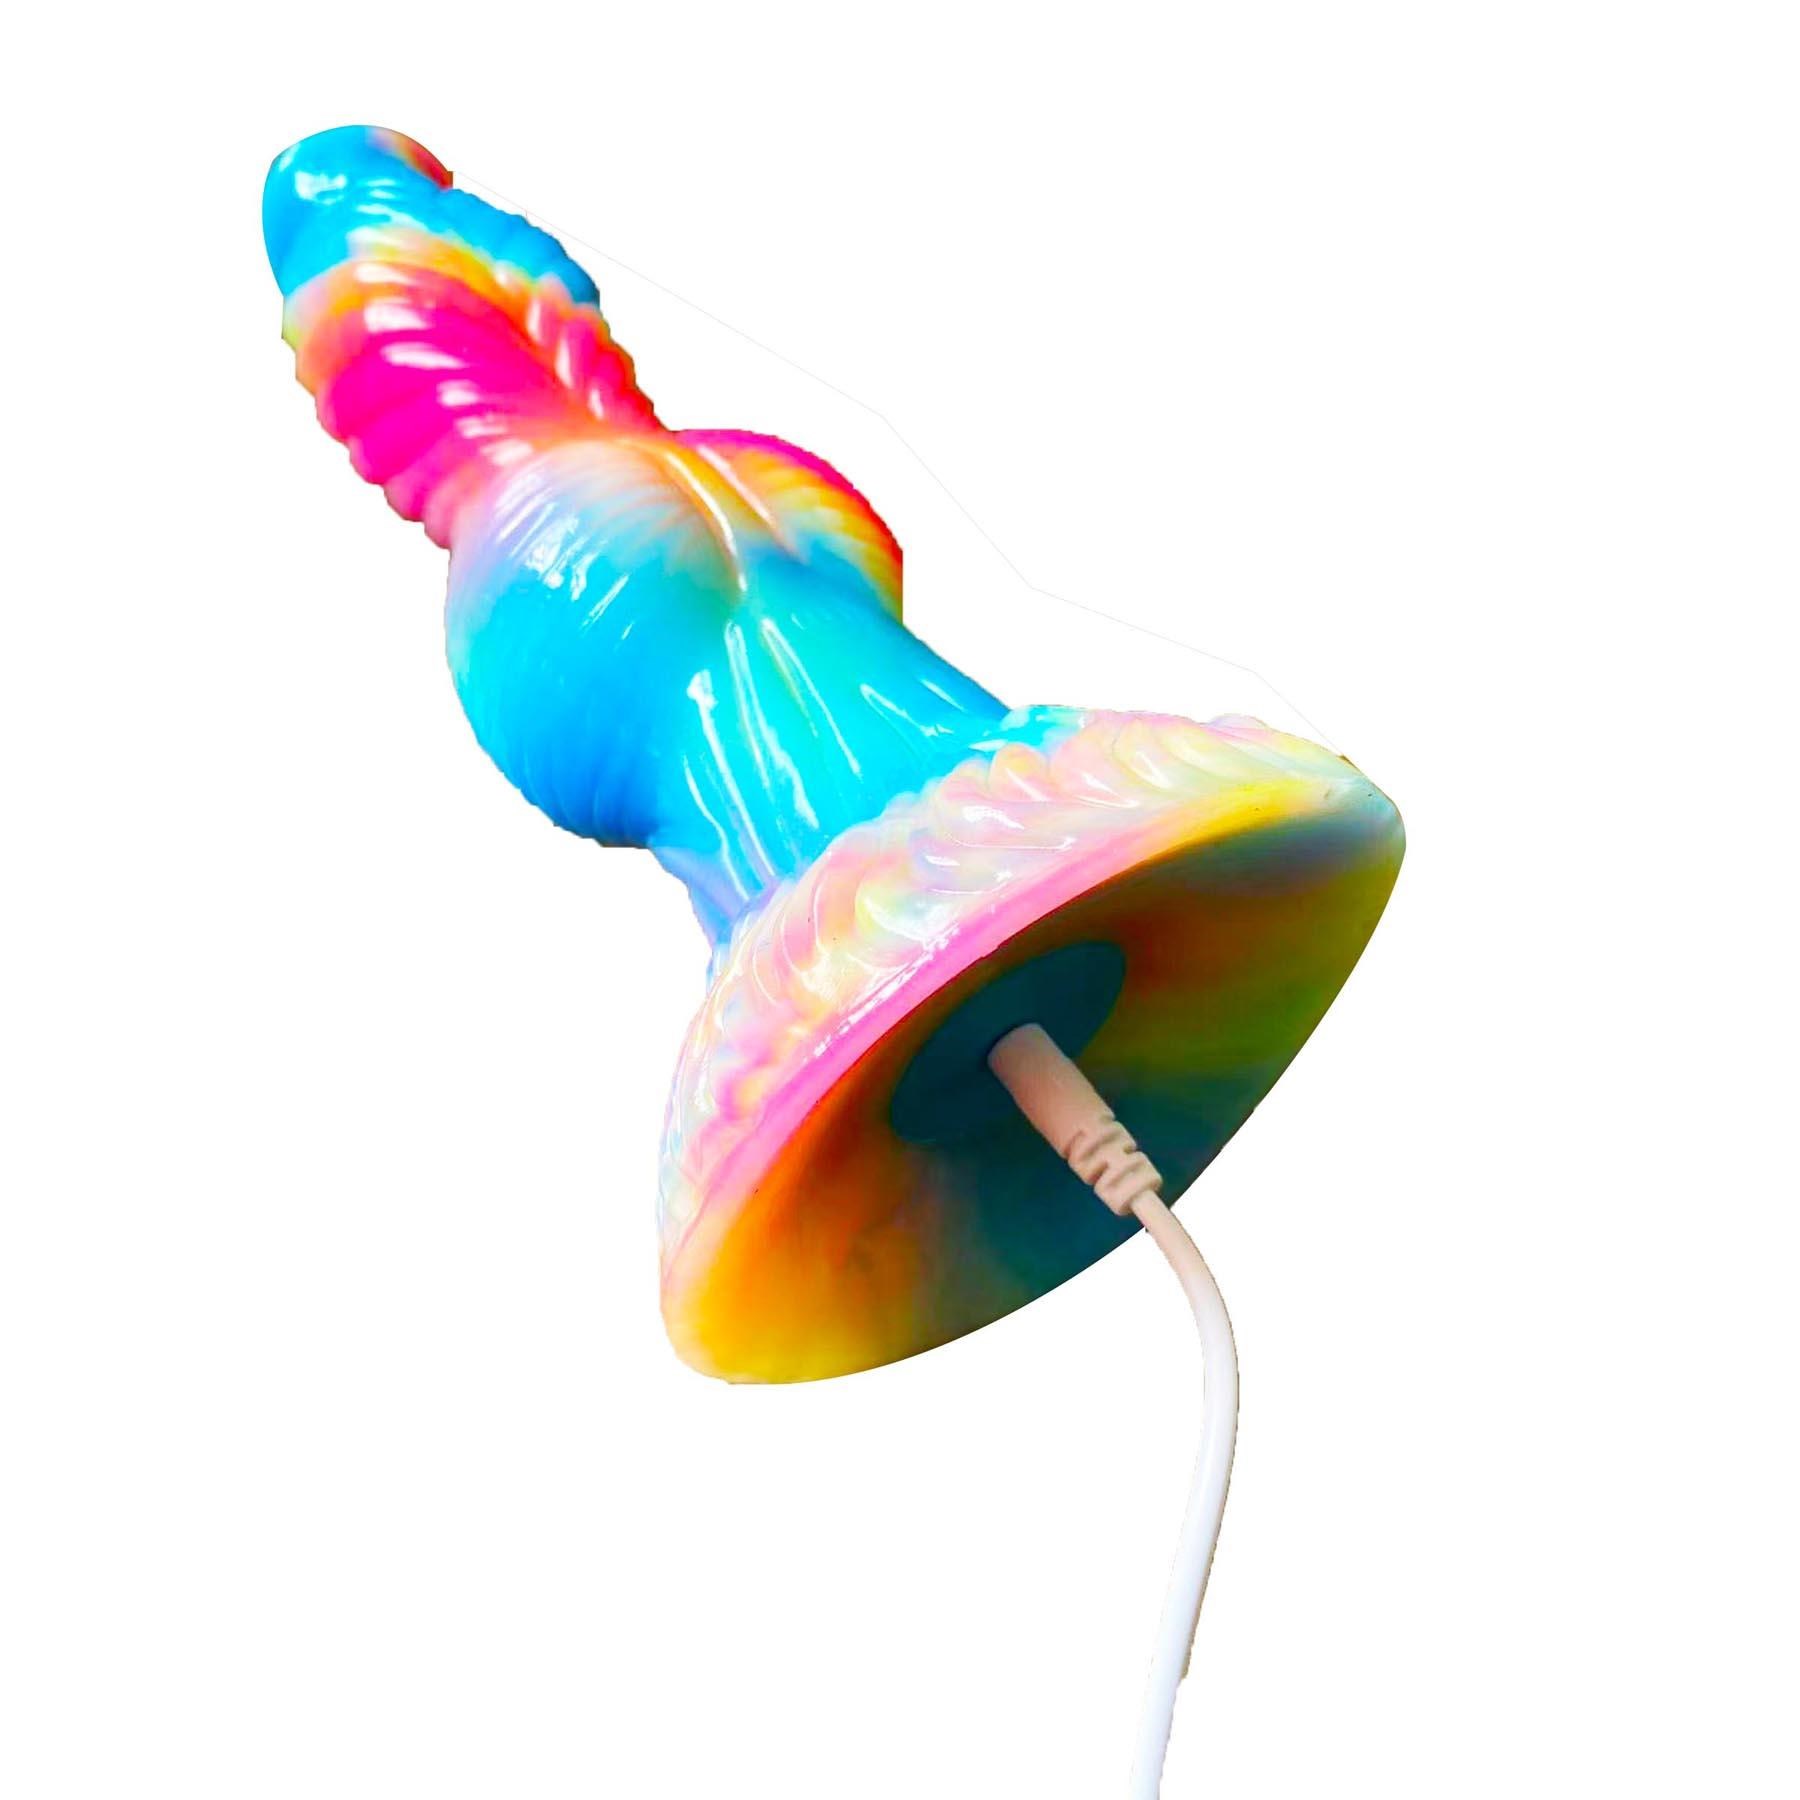 Twisted Unicorn Remote Control Thrusting Dildo - Showing Where Charging Cable is Placed